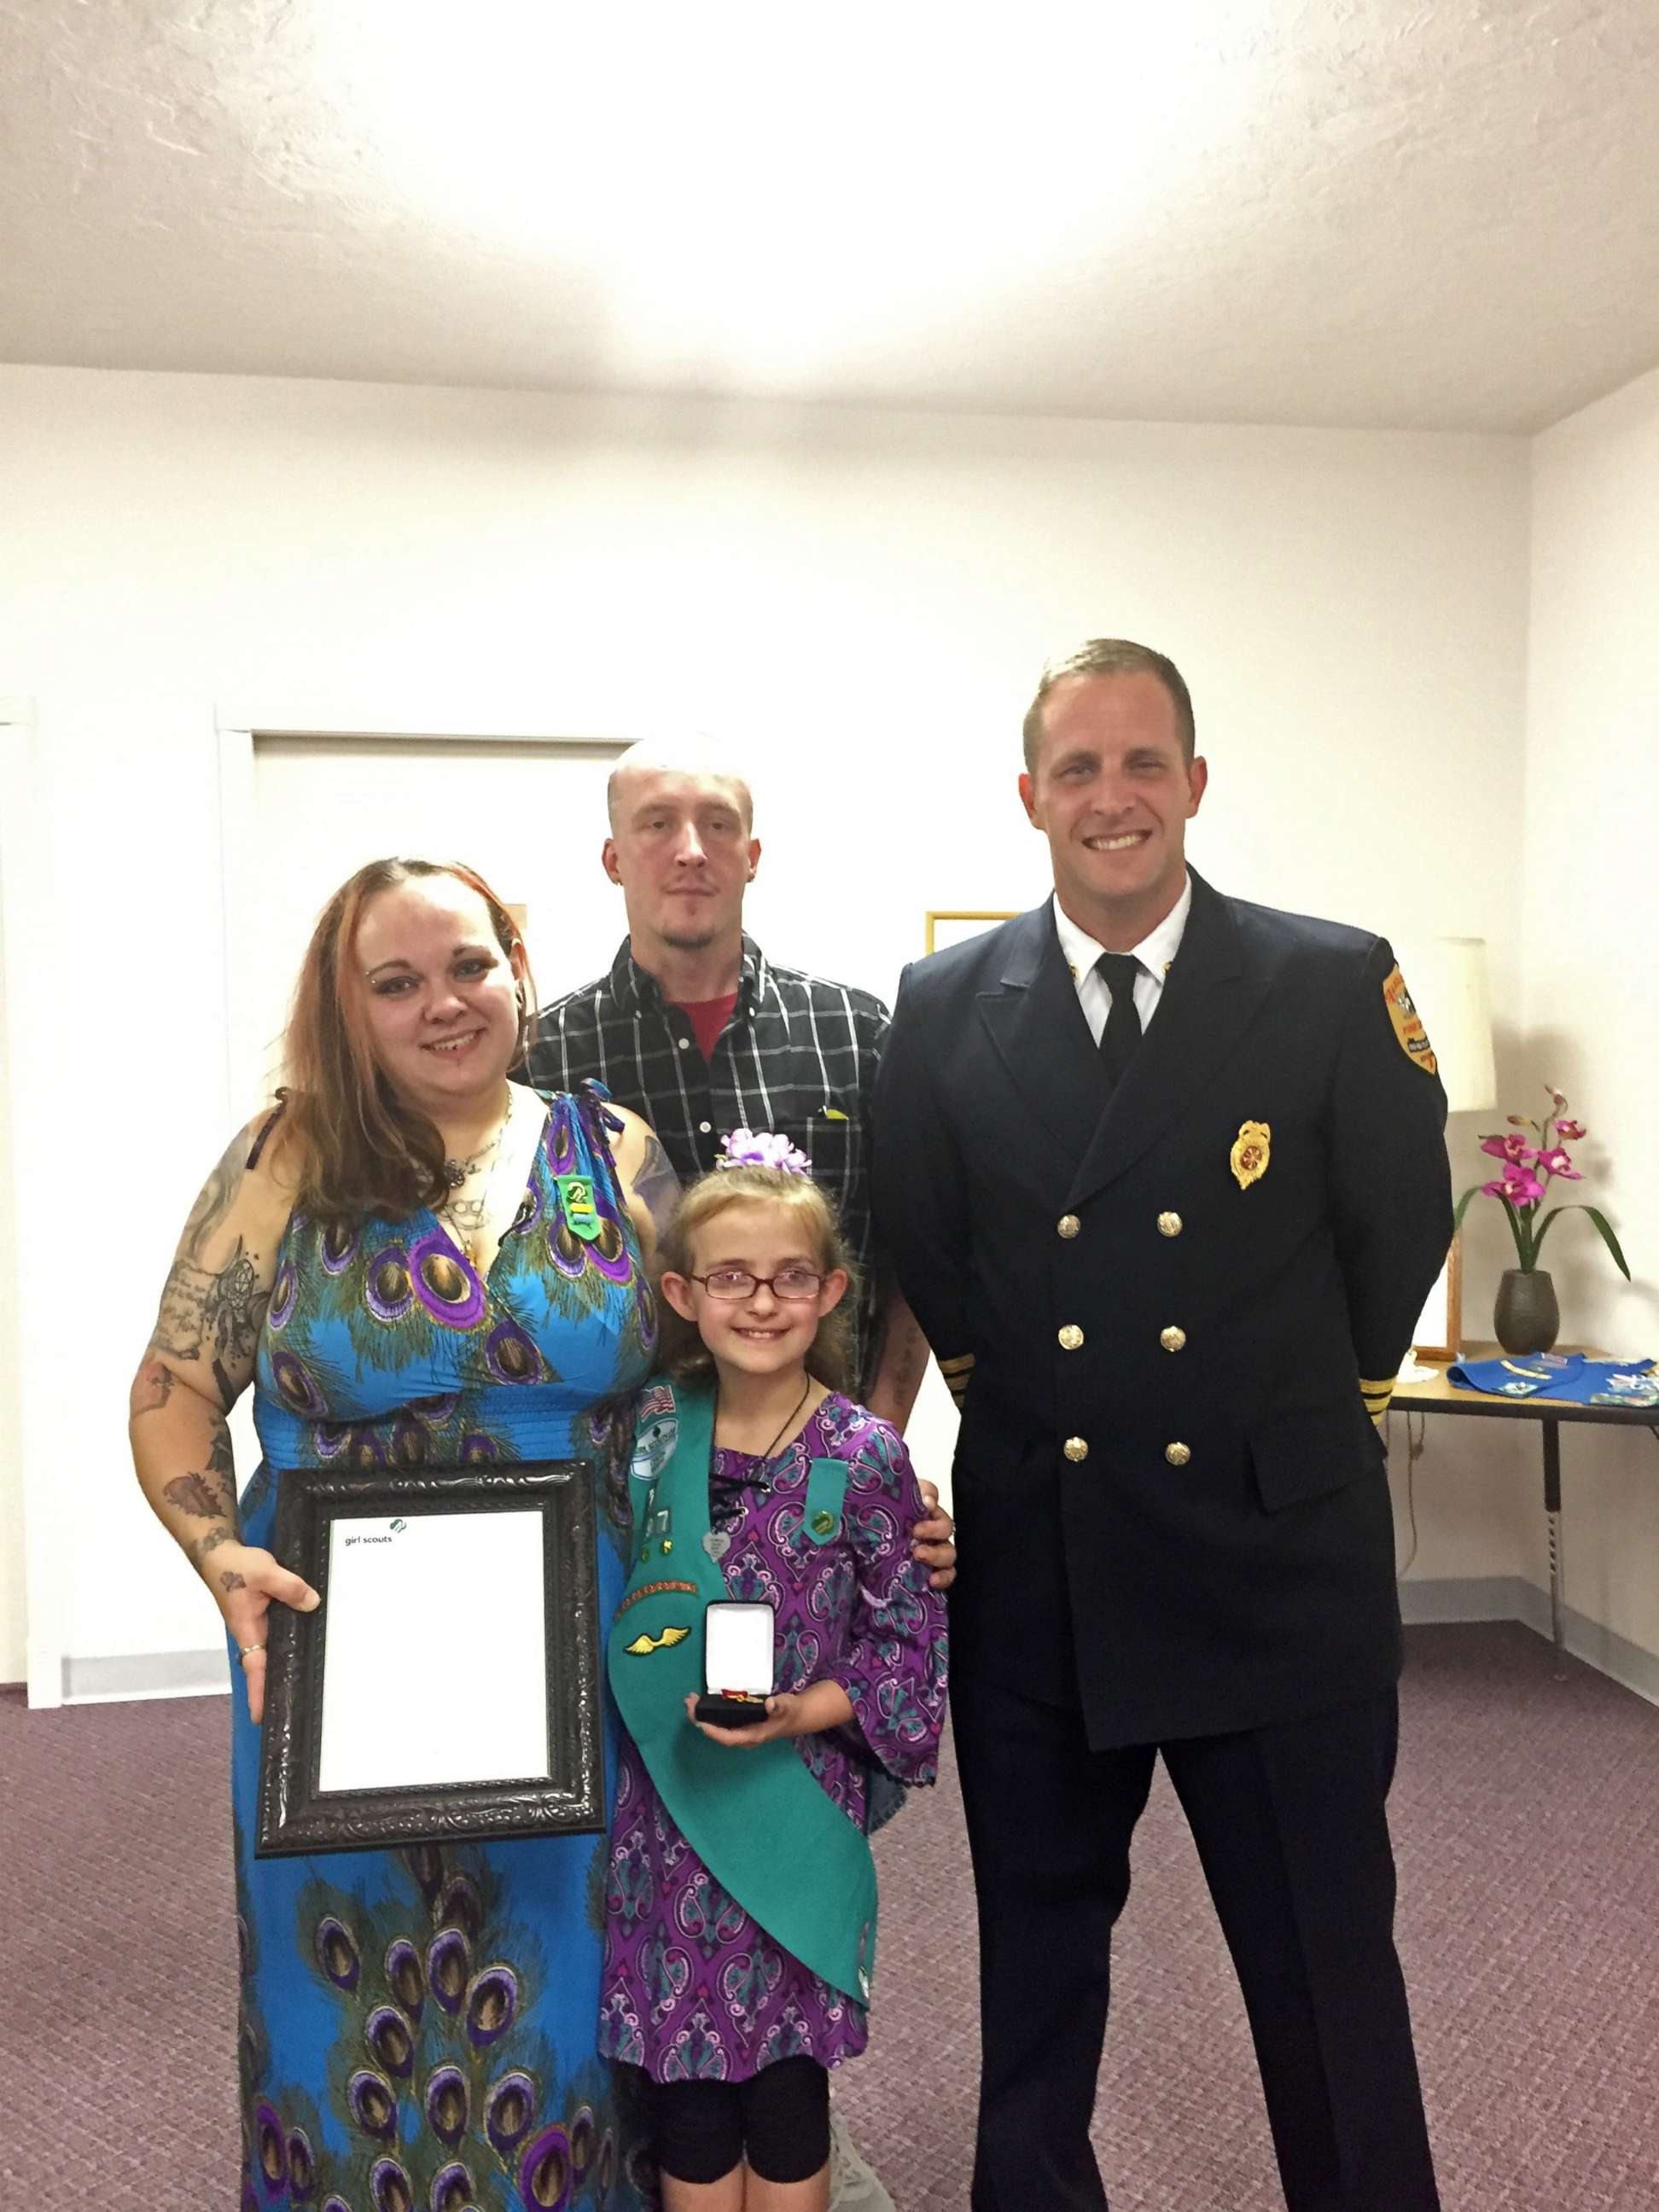 PHOTO: Alexandria, Indiana, Fire Chief Brian Cuneo poses with Melina Lakey, 9, and her parents, Ashley McCollum-Lakey and Jeff Lakey.